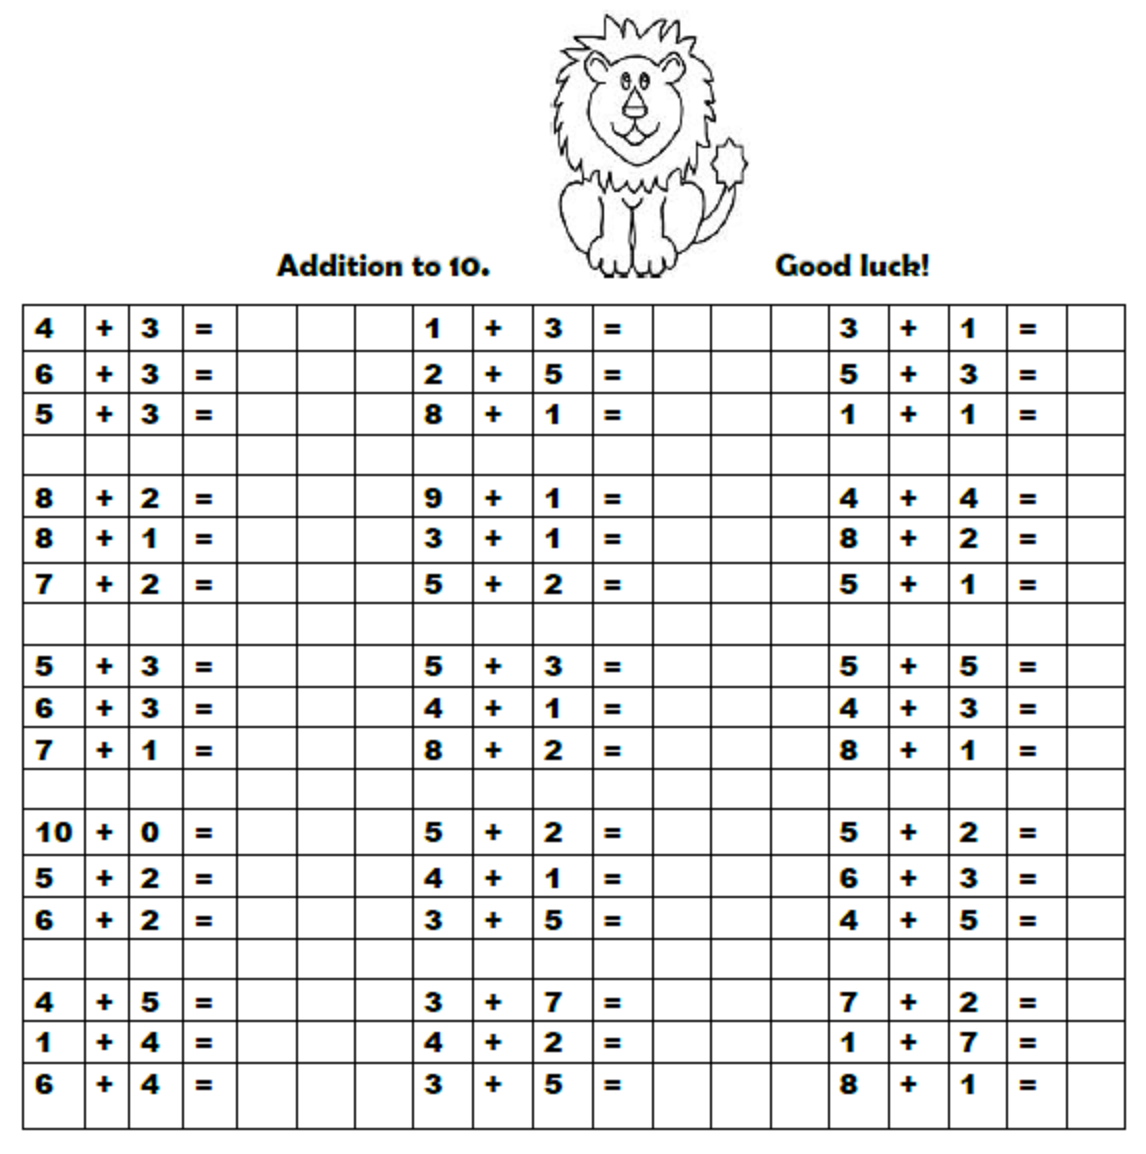 Simple addition worksheets free Simple addition worksheets free